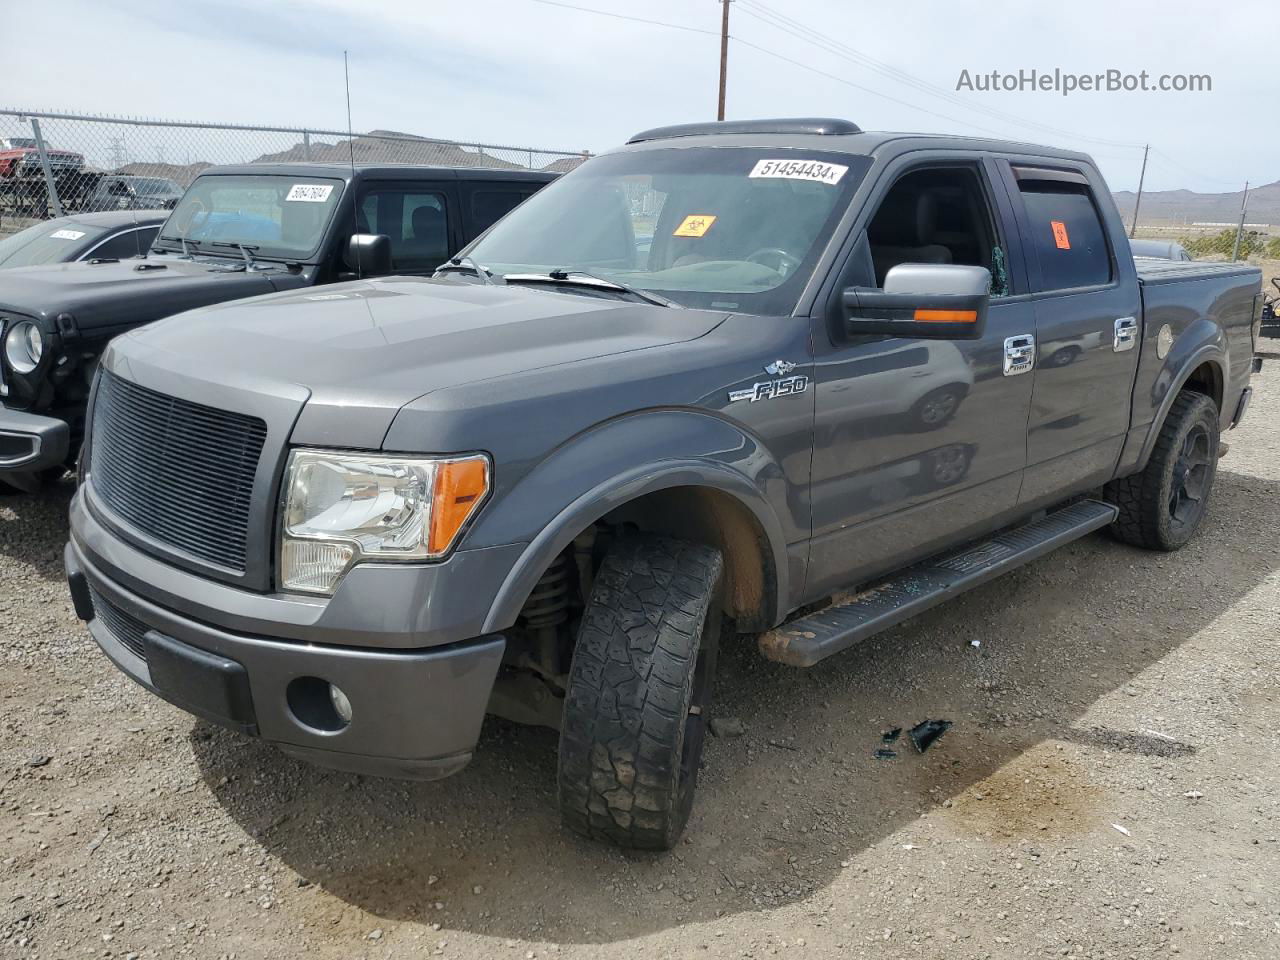 2011 Ford F150 Supercrew Charcoal vin: 1FTFW1CF6BKD59200